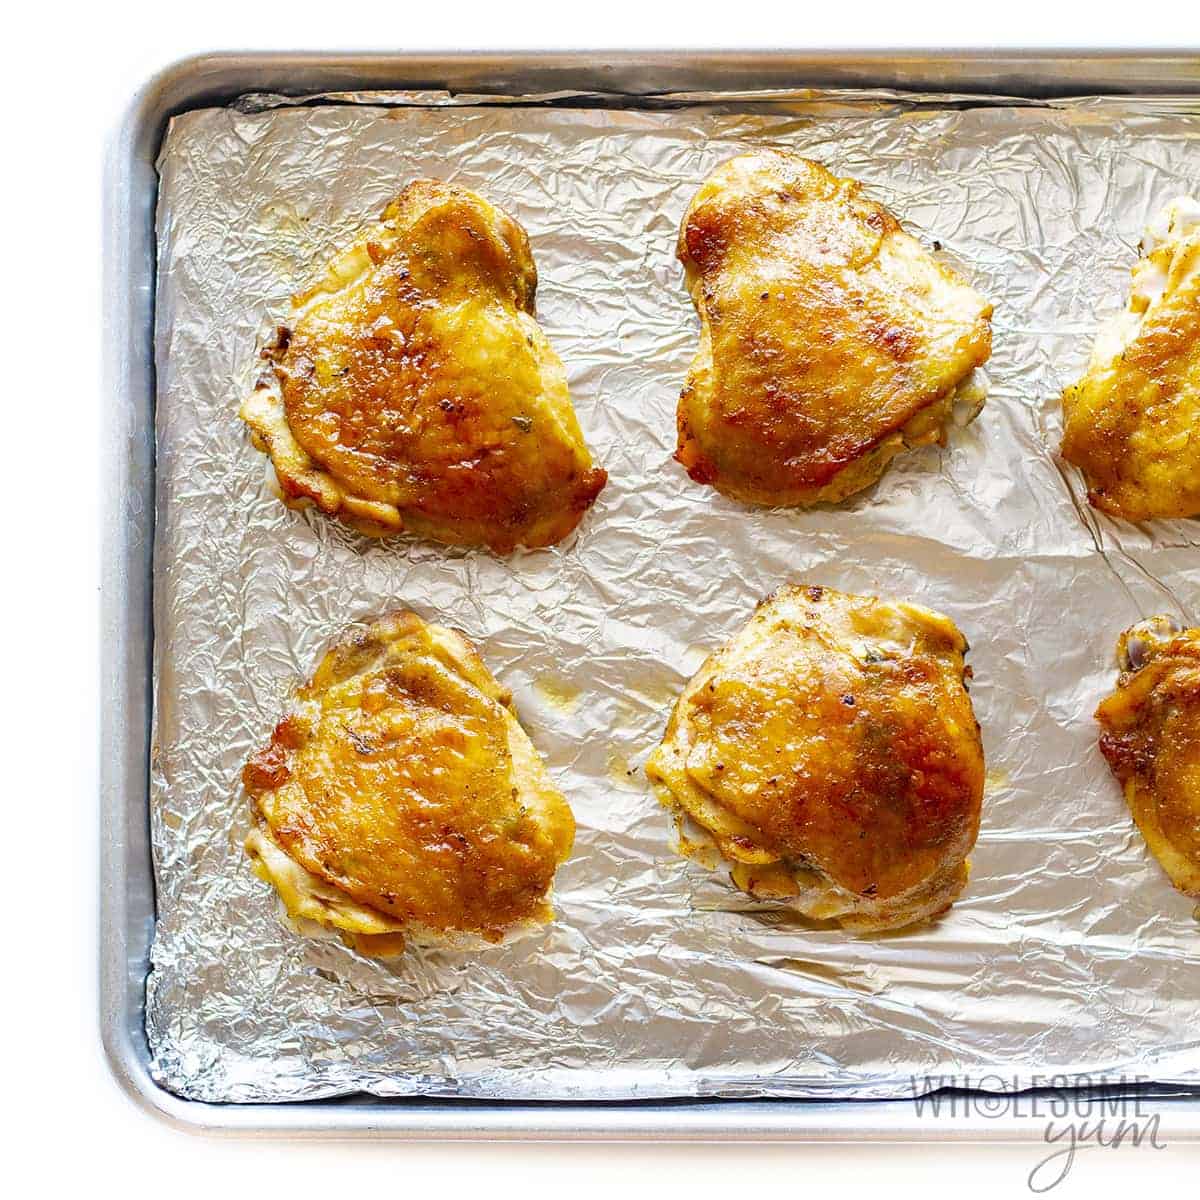 Crispy baked chicken thighs on a sheet pan.